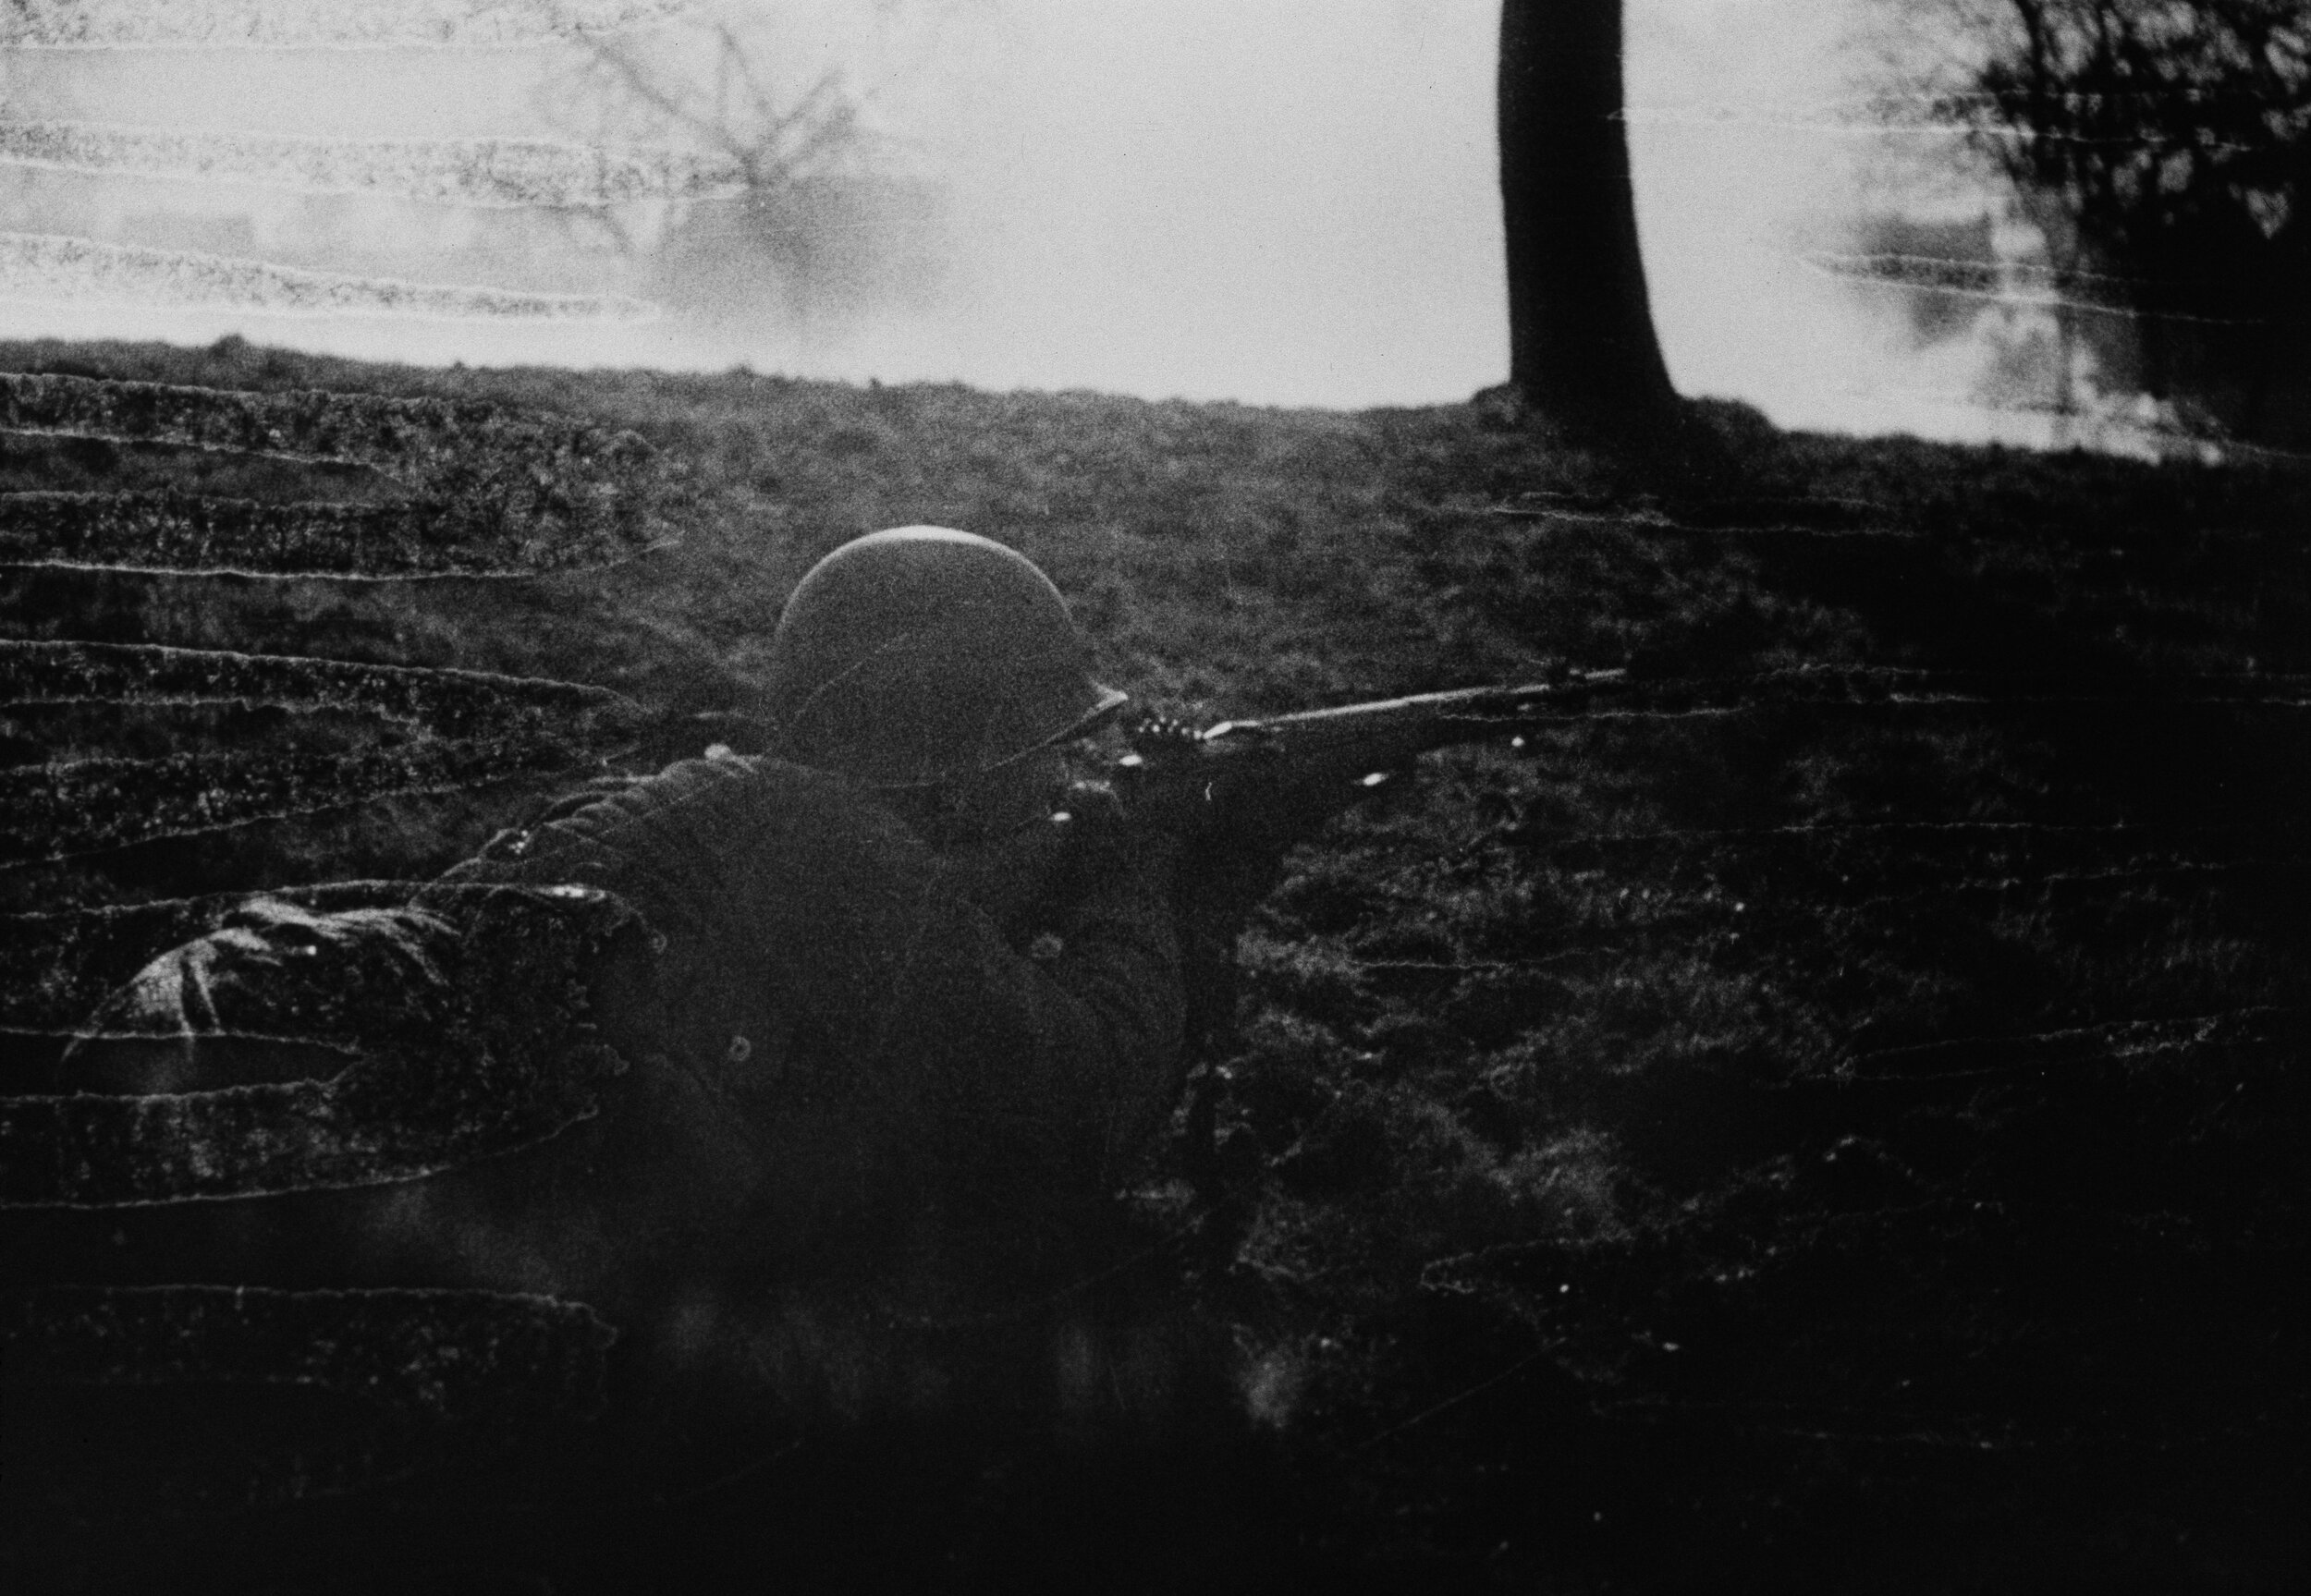 vaccaro_aim to kill_An American GI lines up a shot during the battle on the Rhineland Valley, March, 1945. .jpg